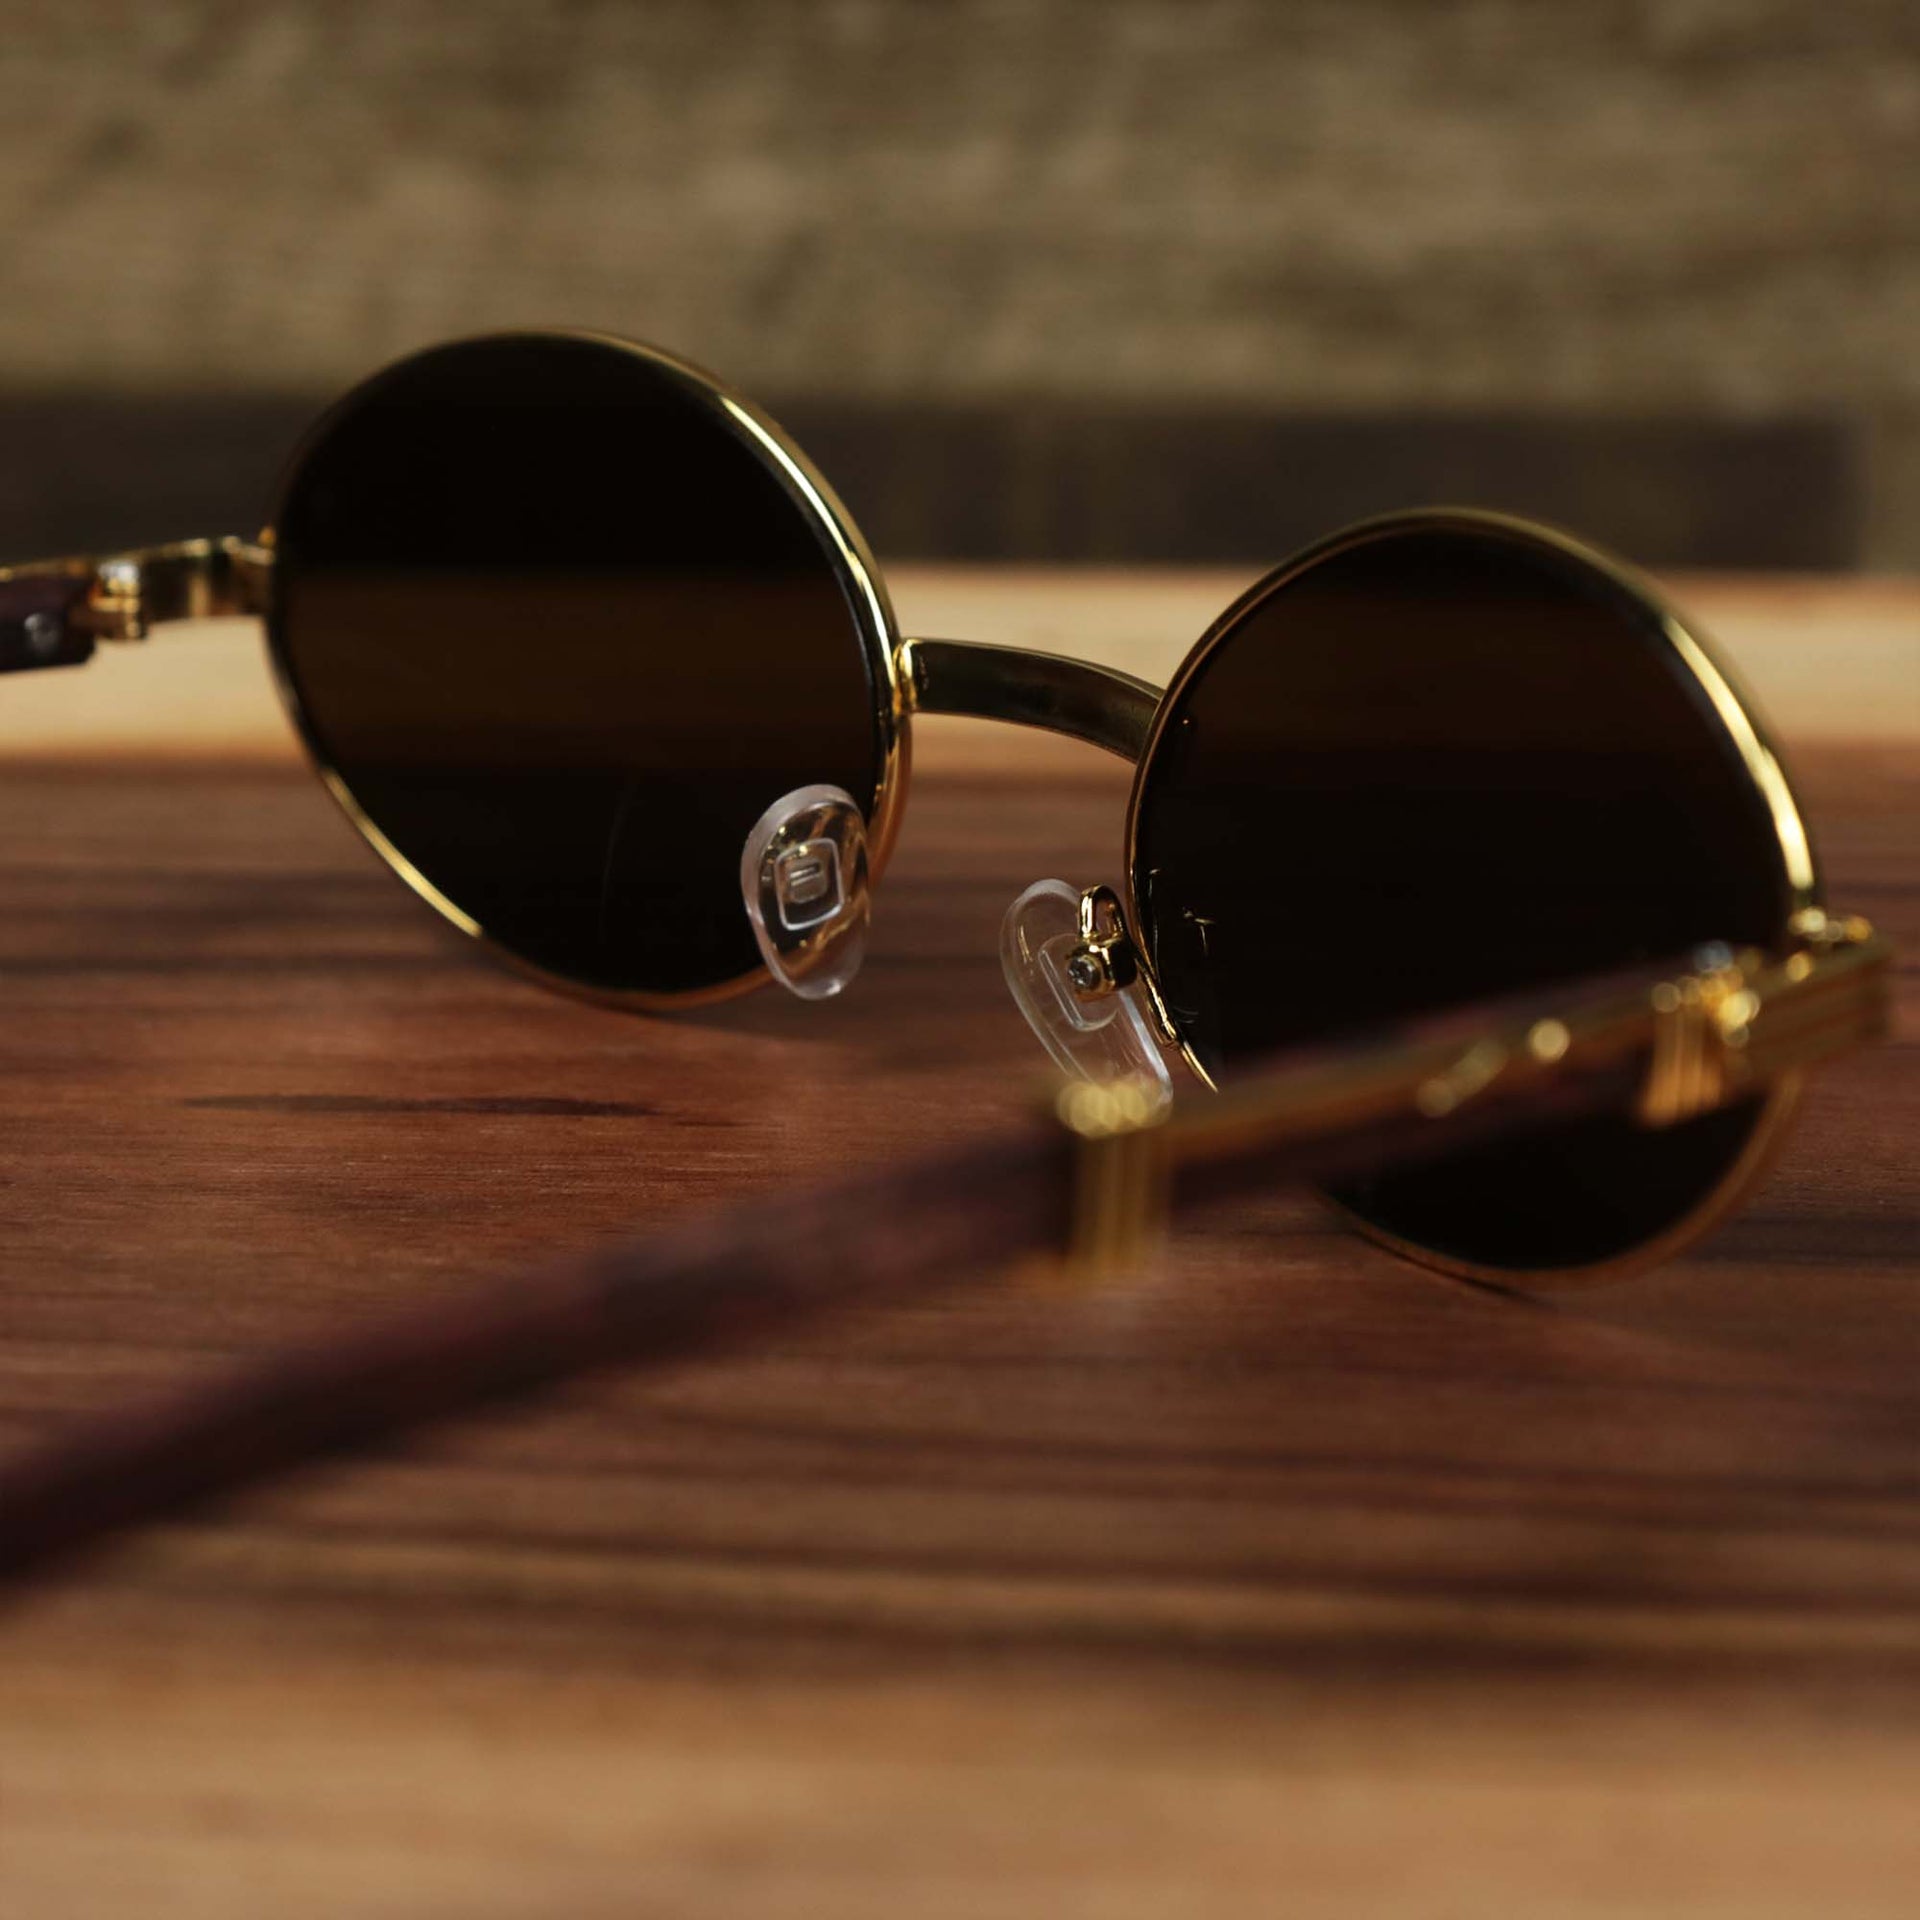 The inside of the Oval 3 Row Frame Brown Lens Sunglasses with Gold Frame